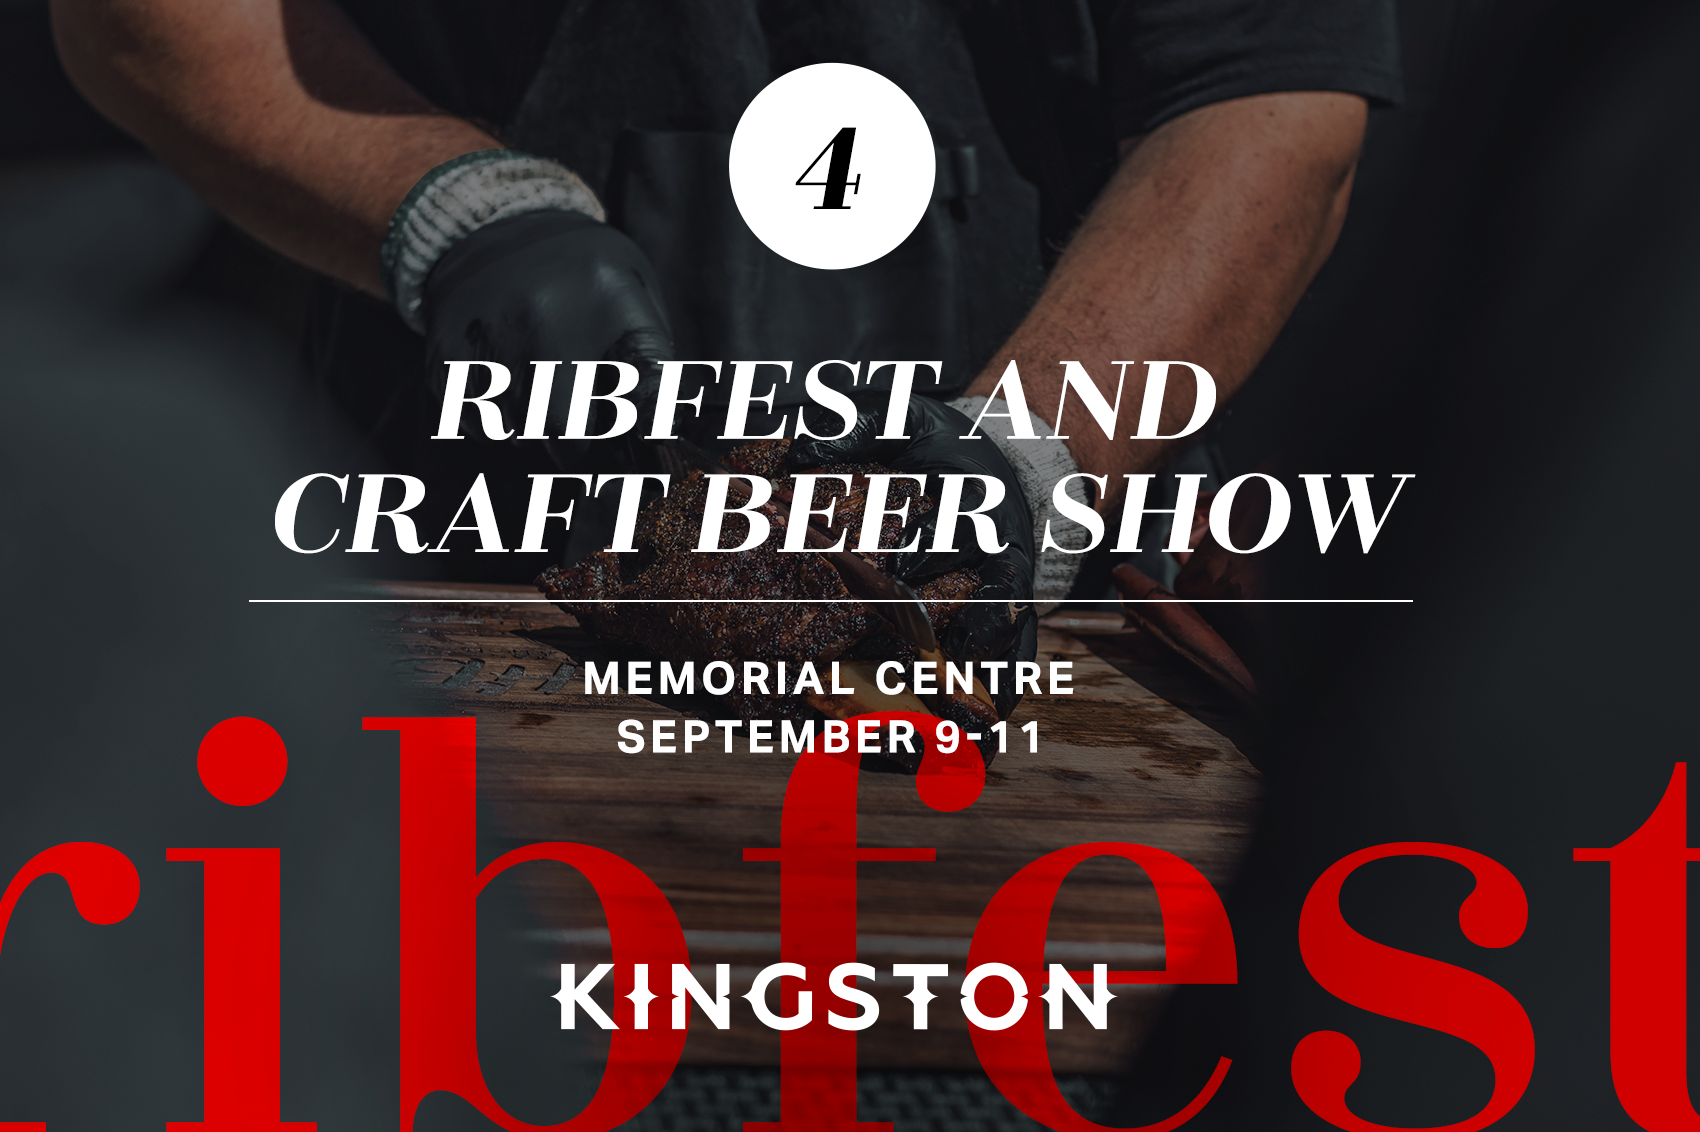 4. Ribfest and Craft Beer Show: Memorial Centre September 9-11